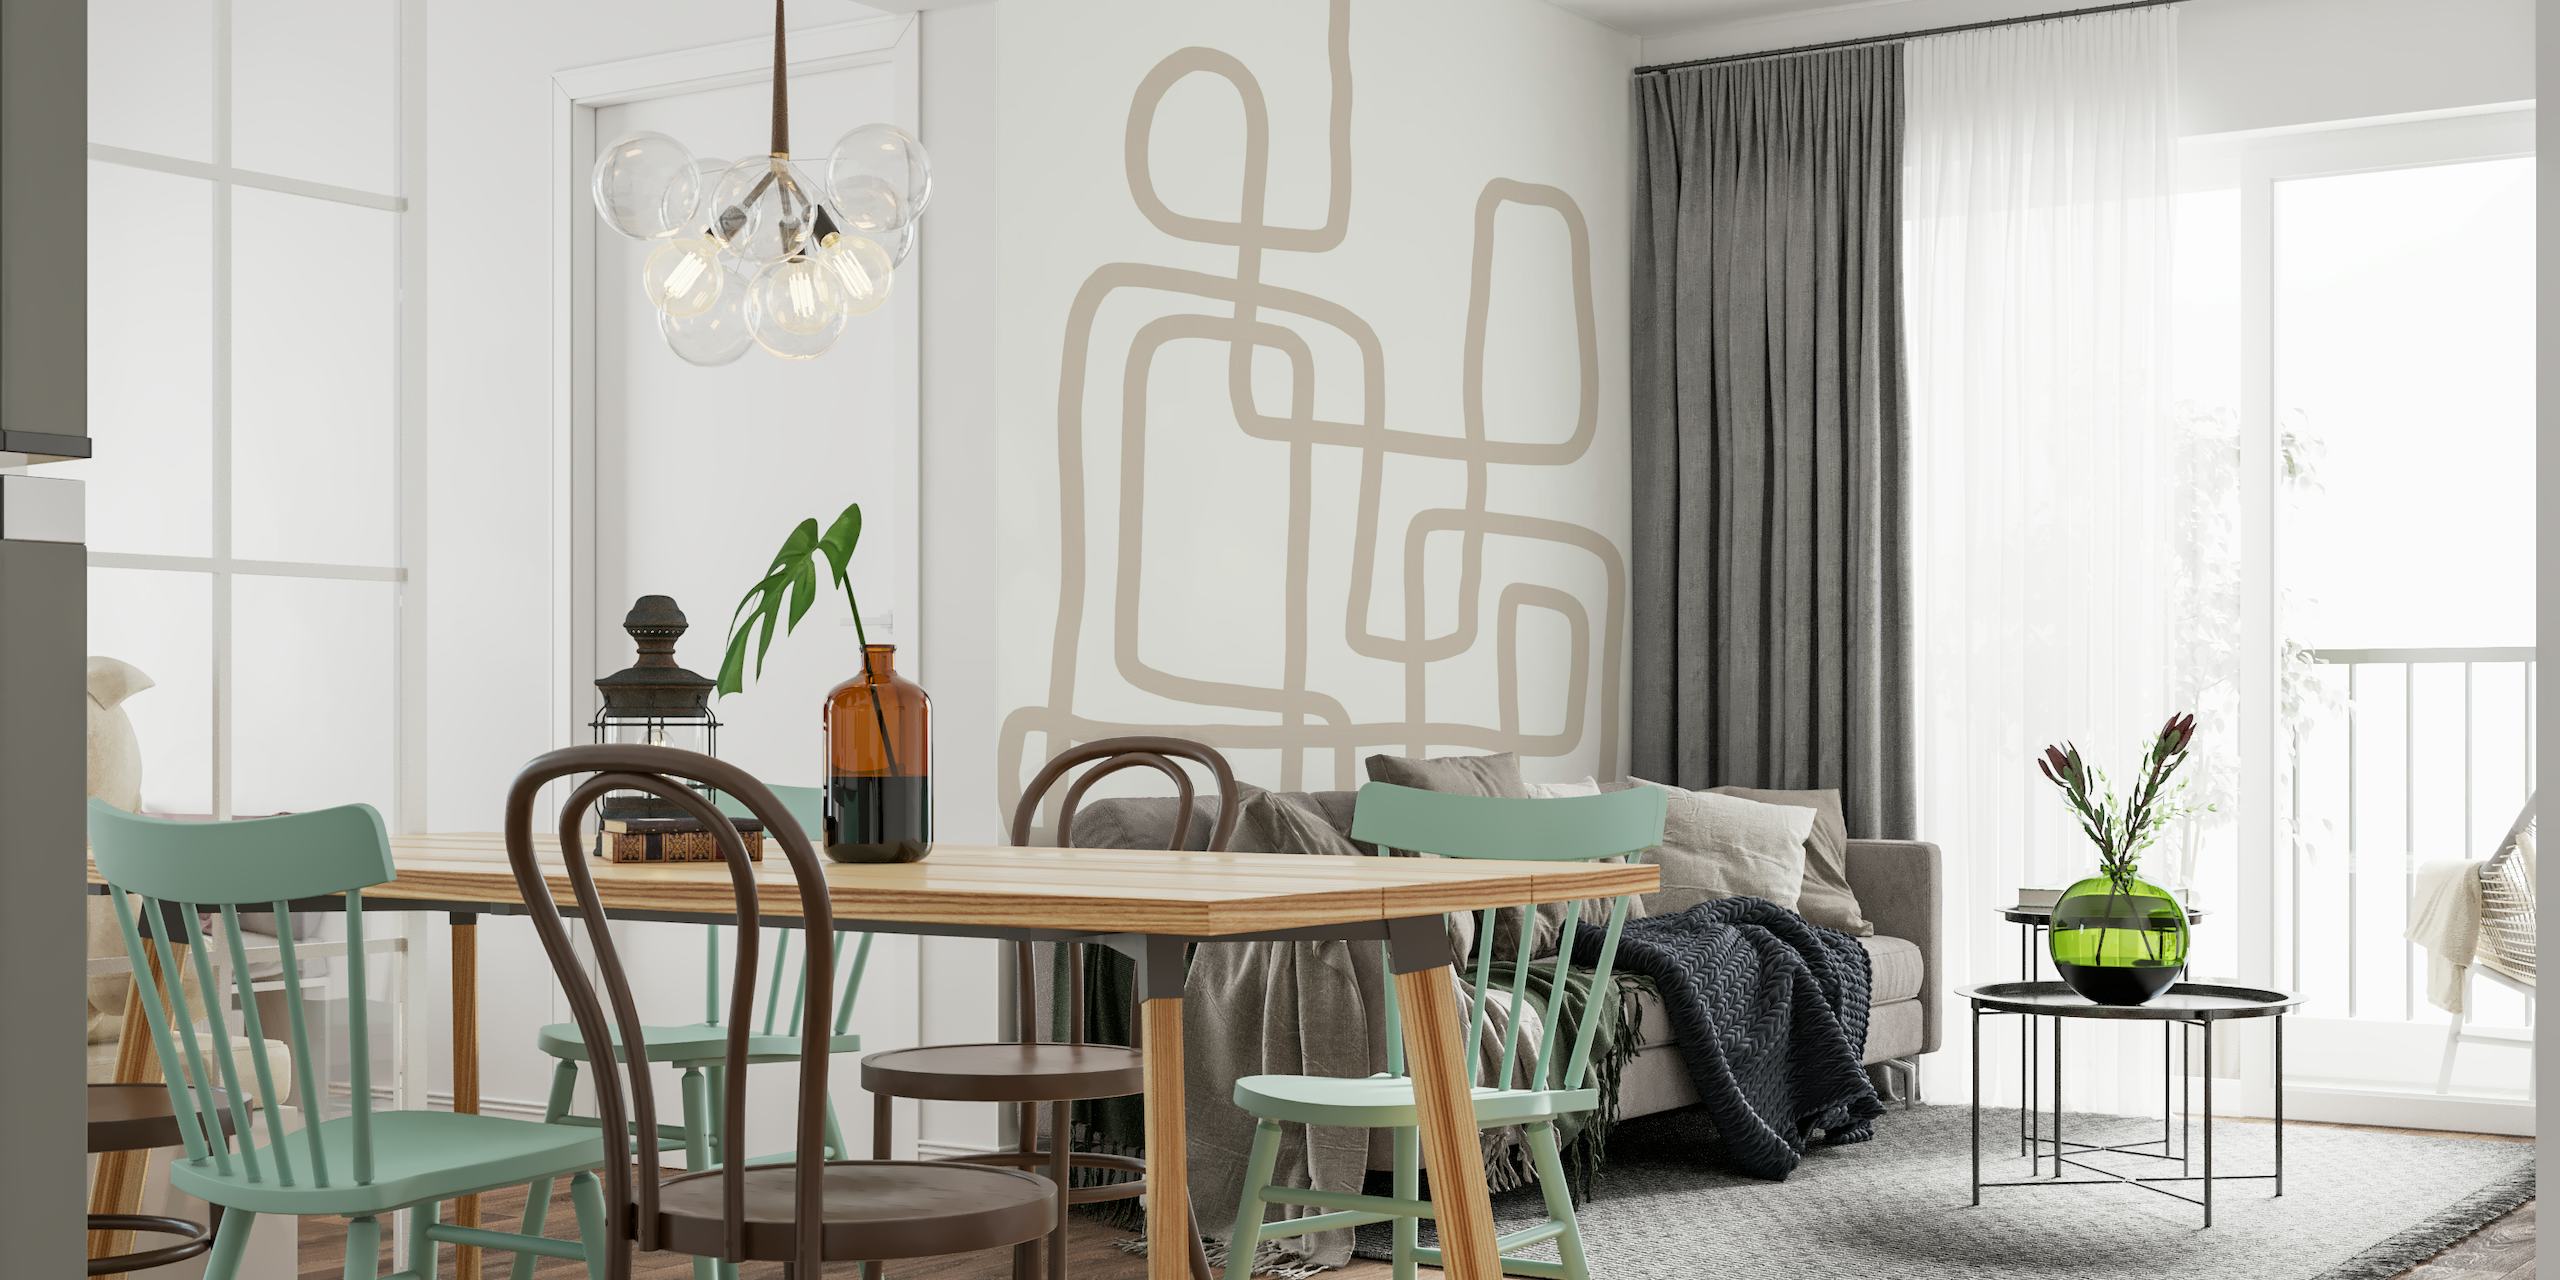 Minimalistic Continuous Line Drawing wall mural on neutral background